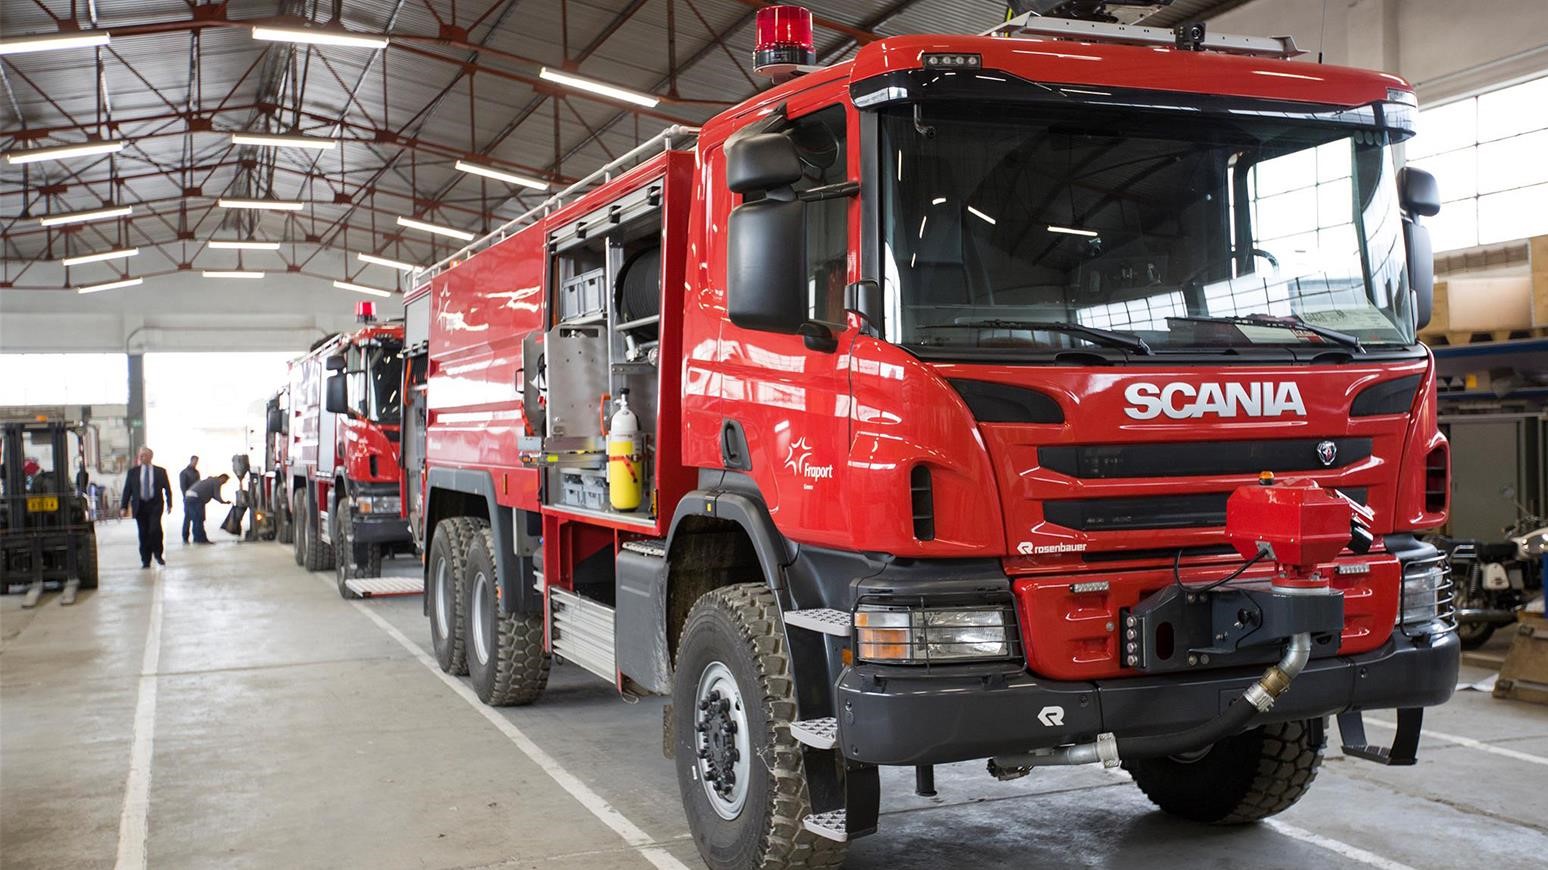 Fraport Greece Order Scania Fire Trucks To Improve Airport Fire Safety